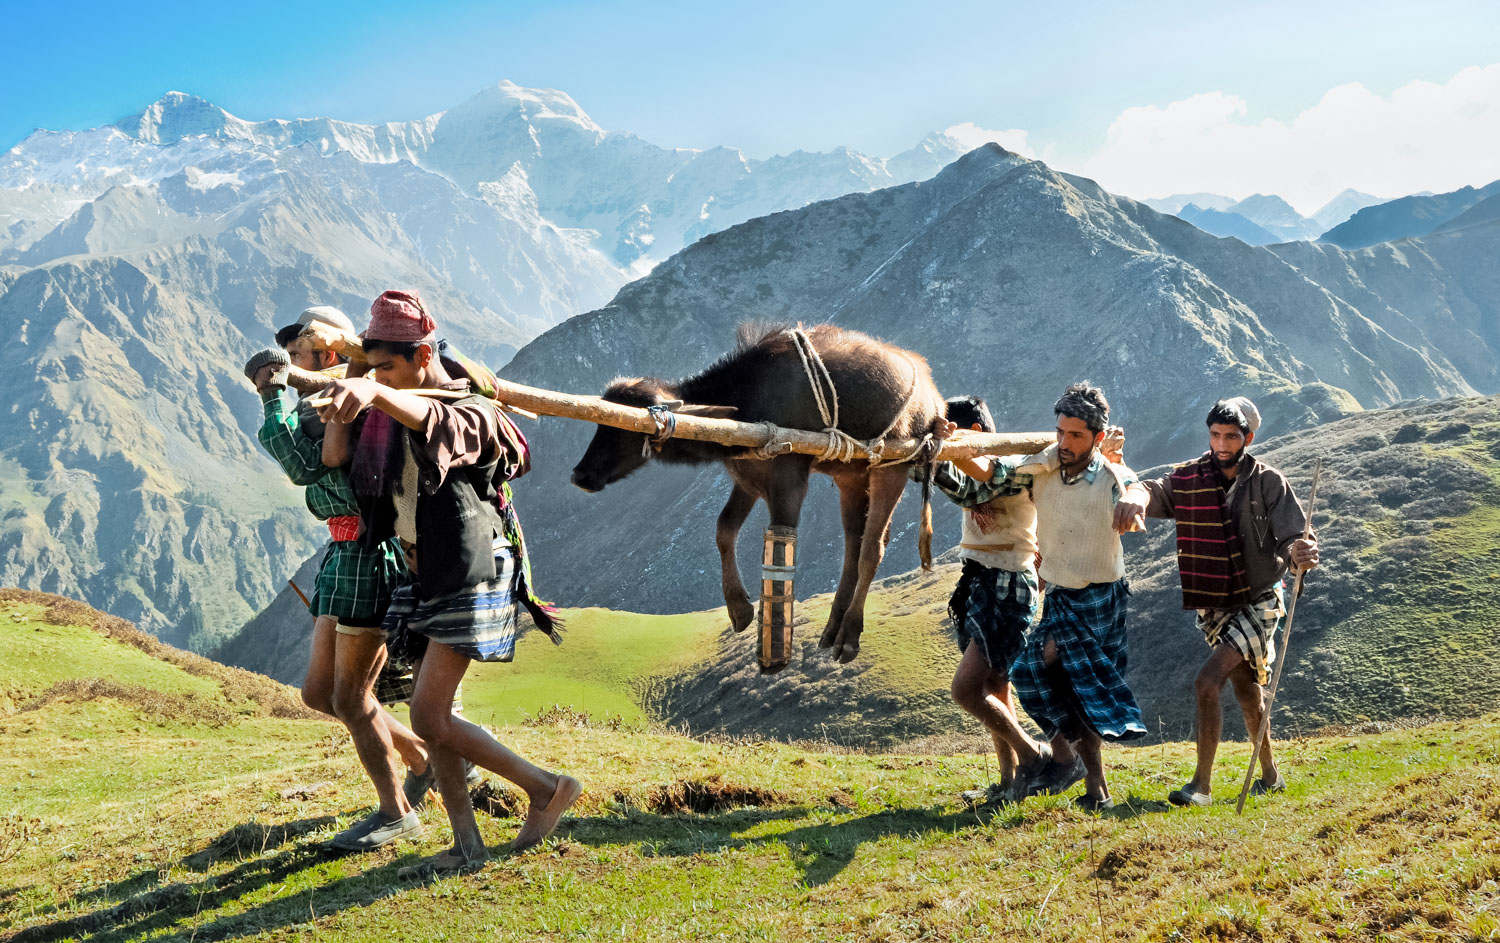 Nomads of the Himalayas : A Fascinating Glimpse into the Rarely-Seen Forest World of the Van Gujjars